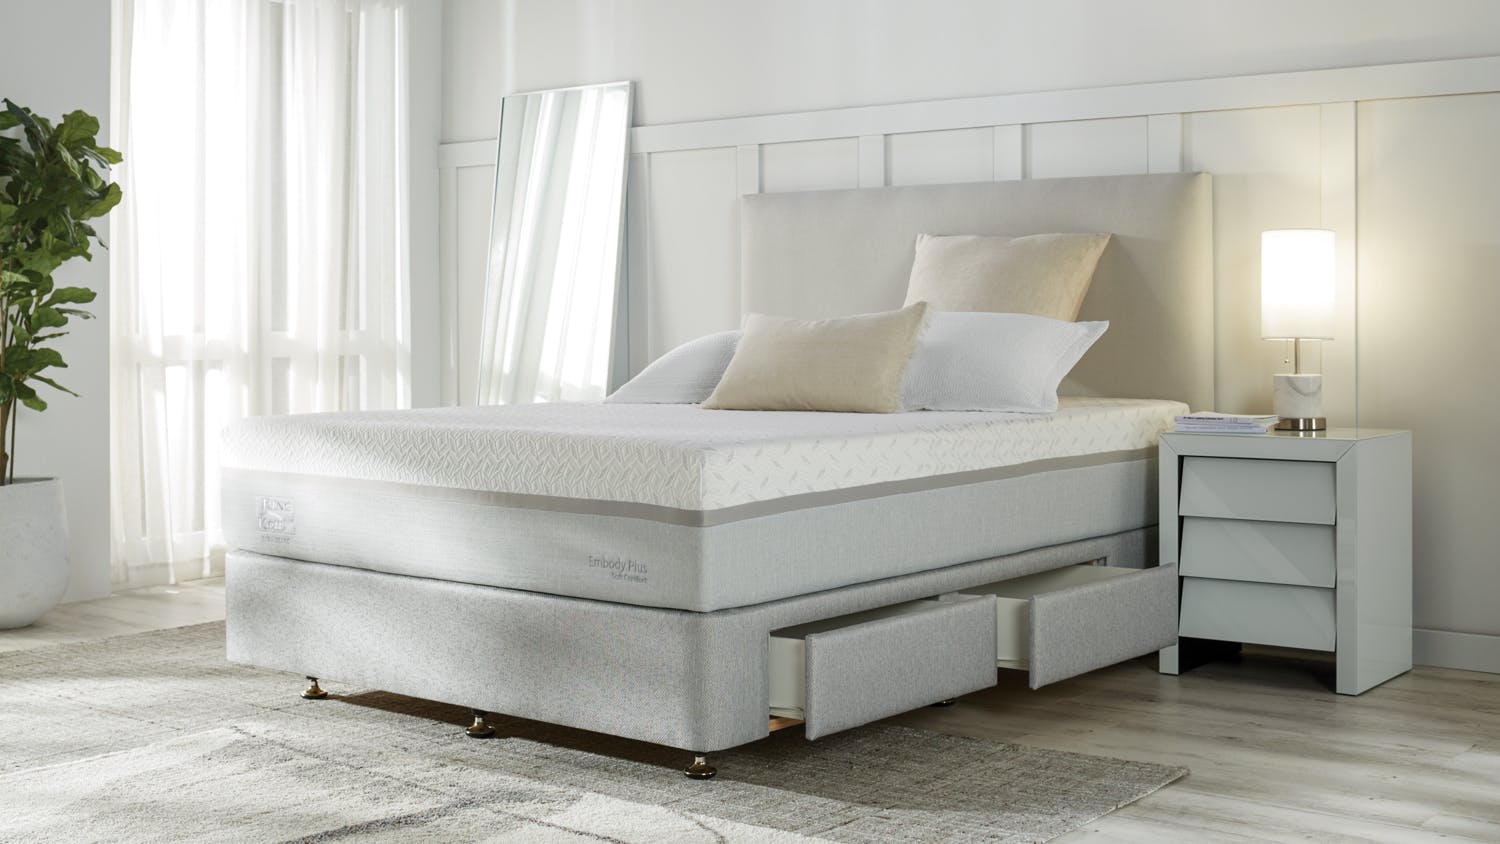 King Koil Embody Plus Soft Queen Mattress with Designer Silver Drawer Bed Base